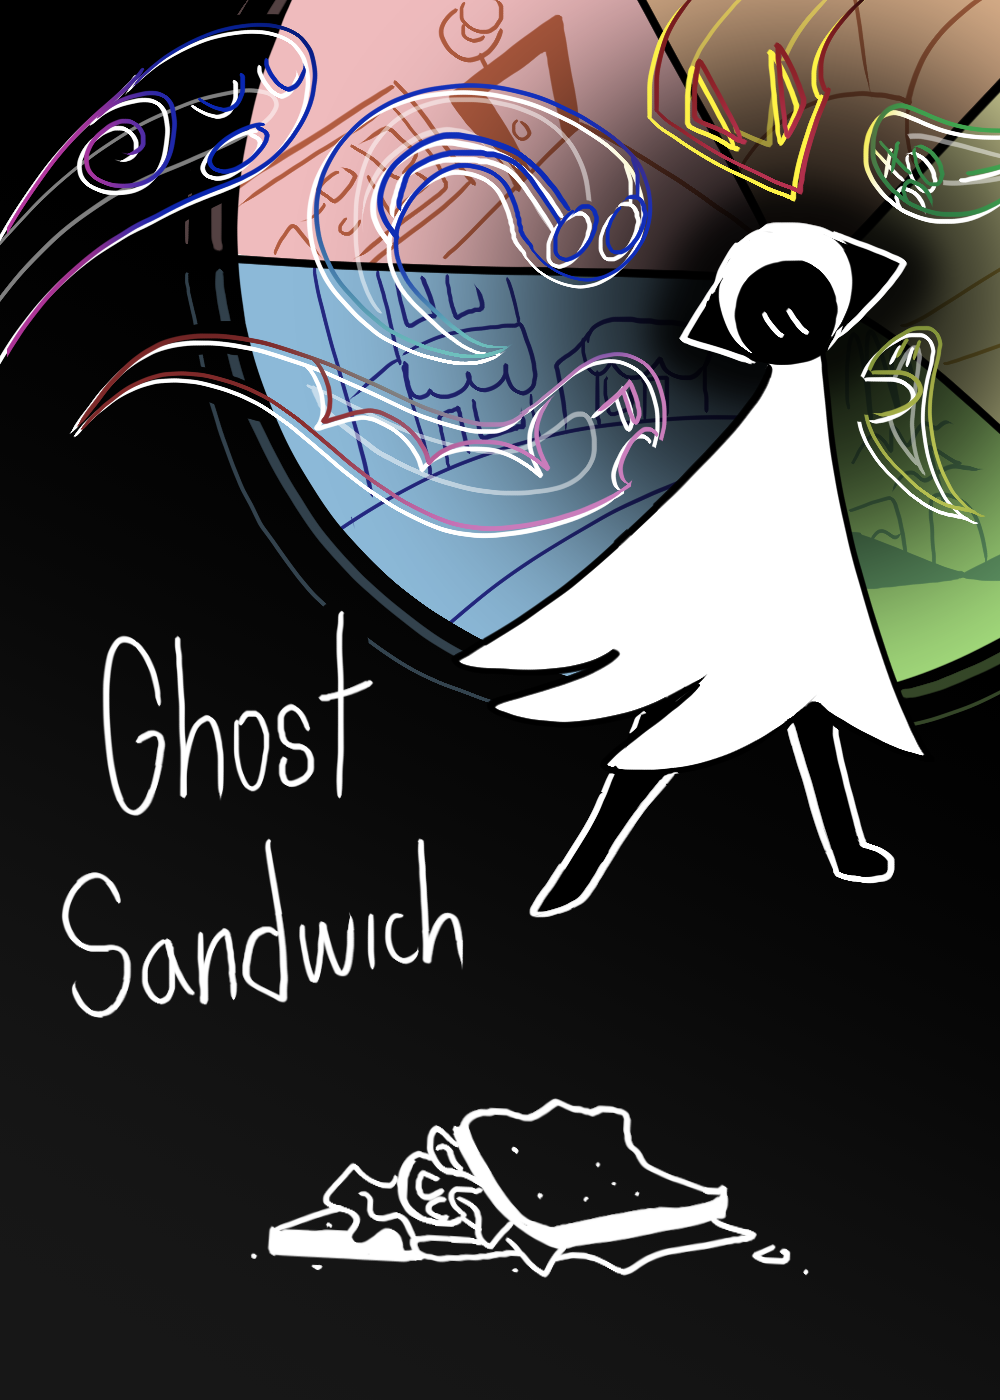 The Ghost Sandwich poster showing an Eye staring at a sandwich dropped on the ground.